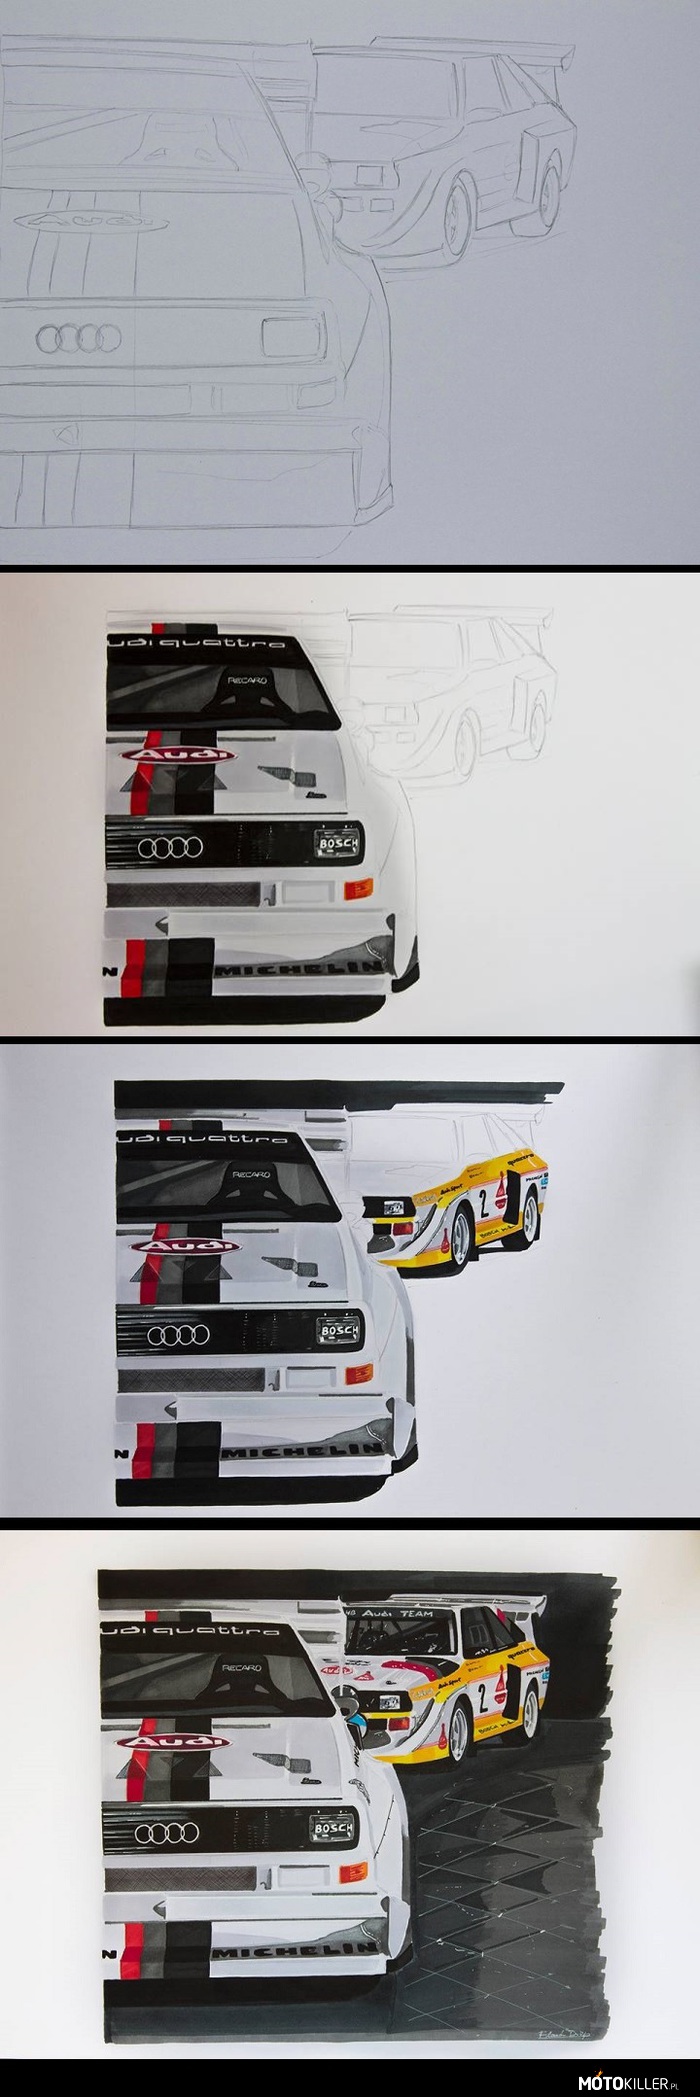 Audi Pikes Peak and Audi S1 quattro – By F. Diego 